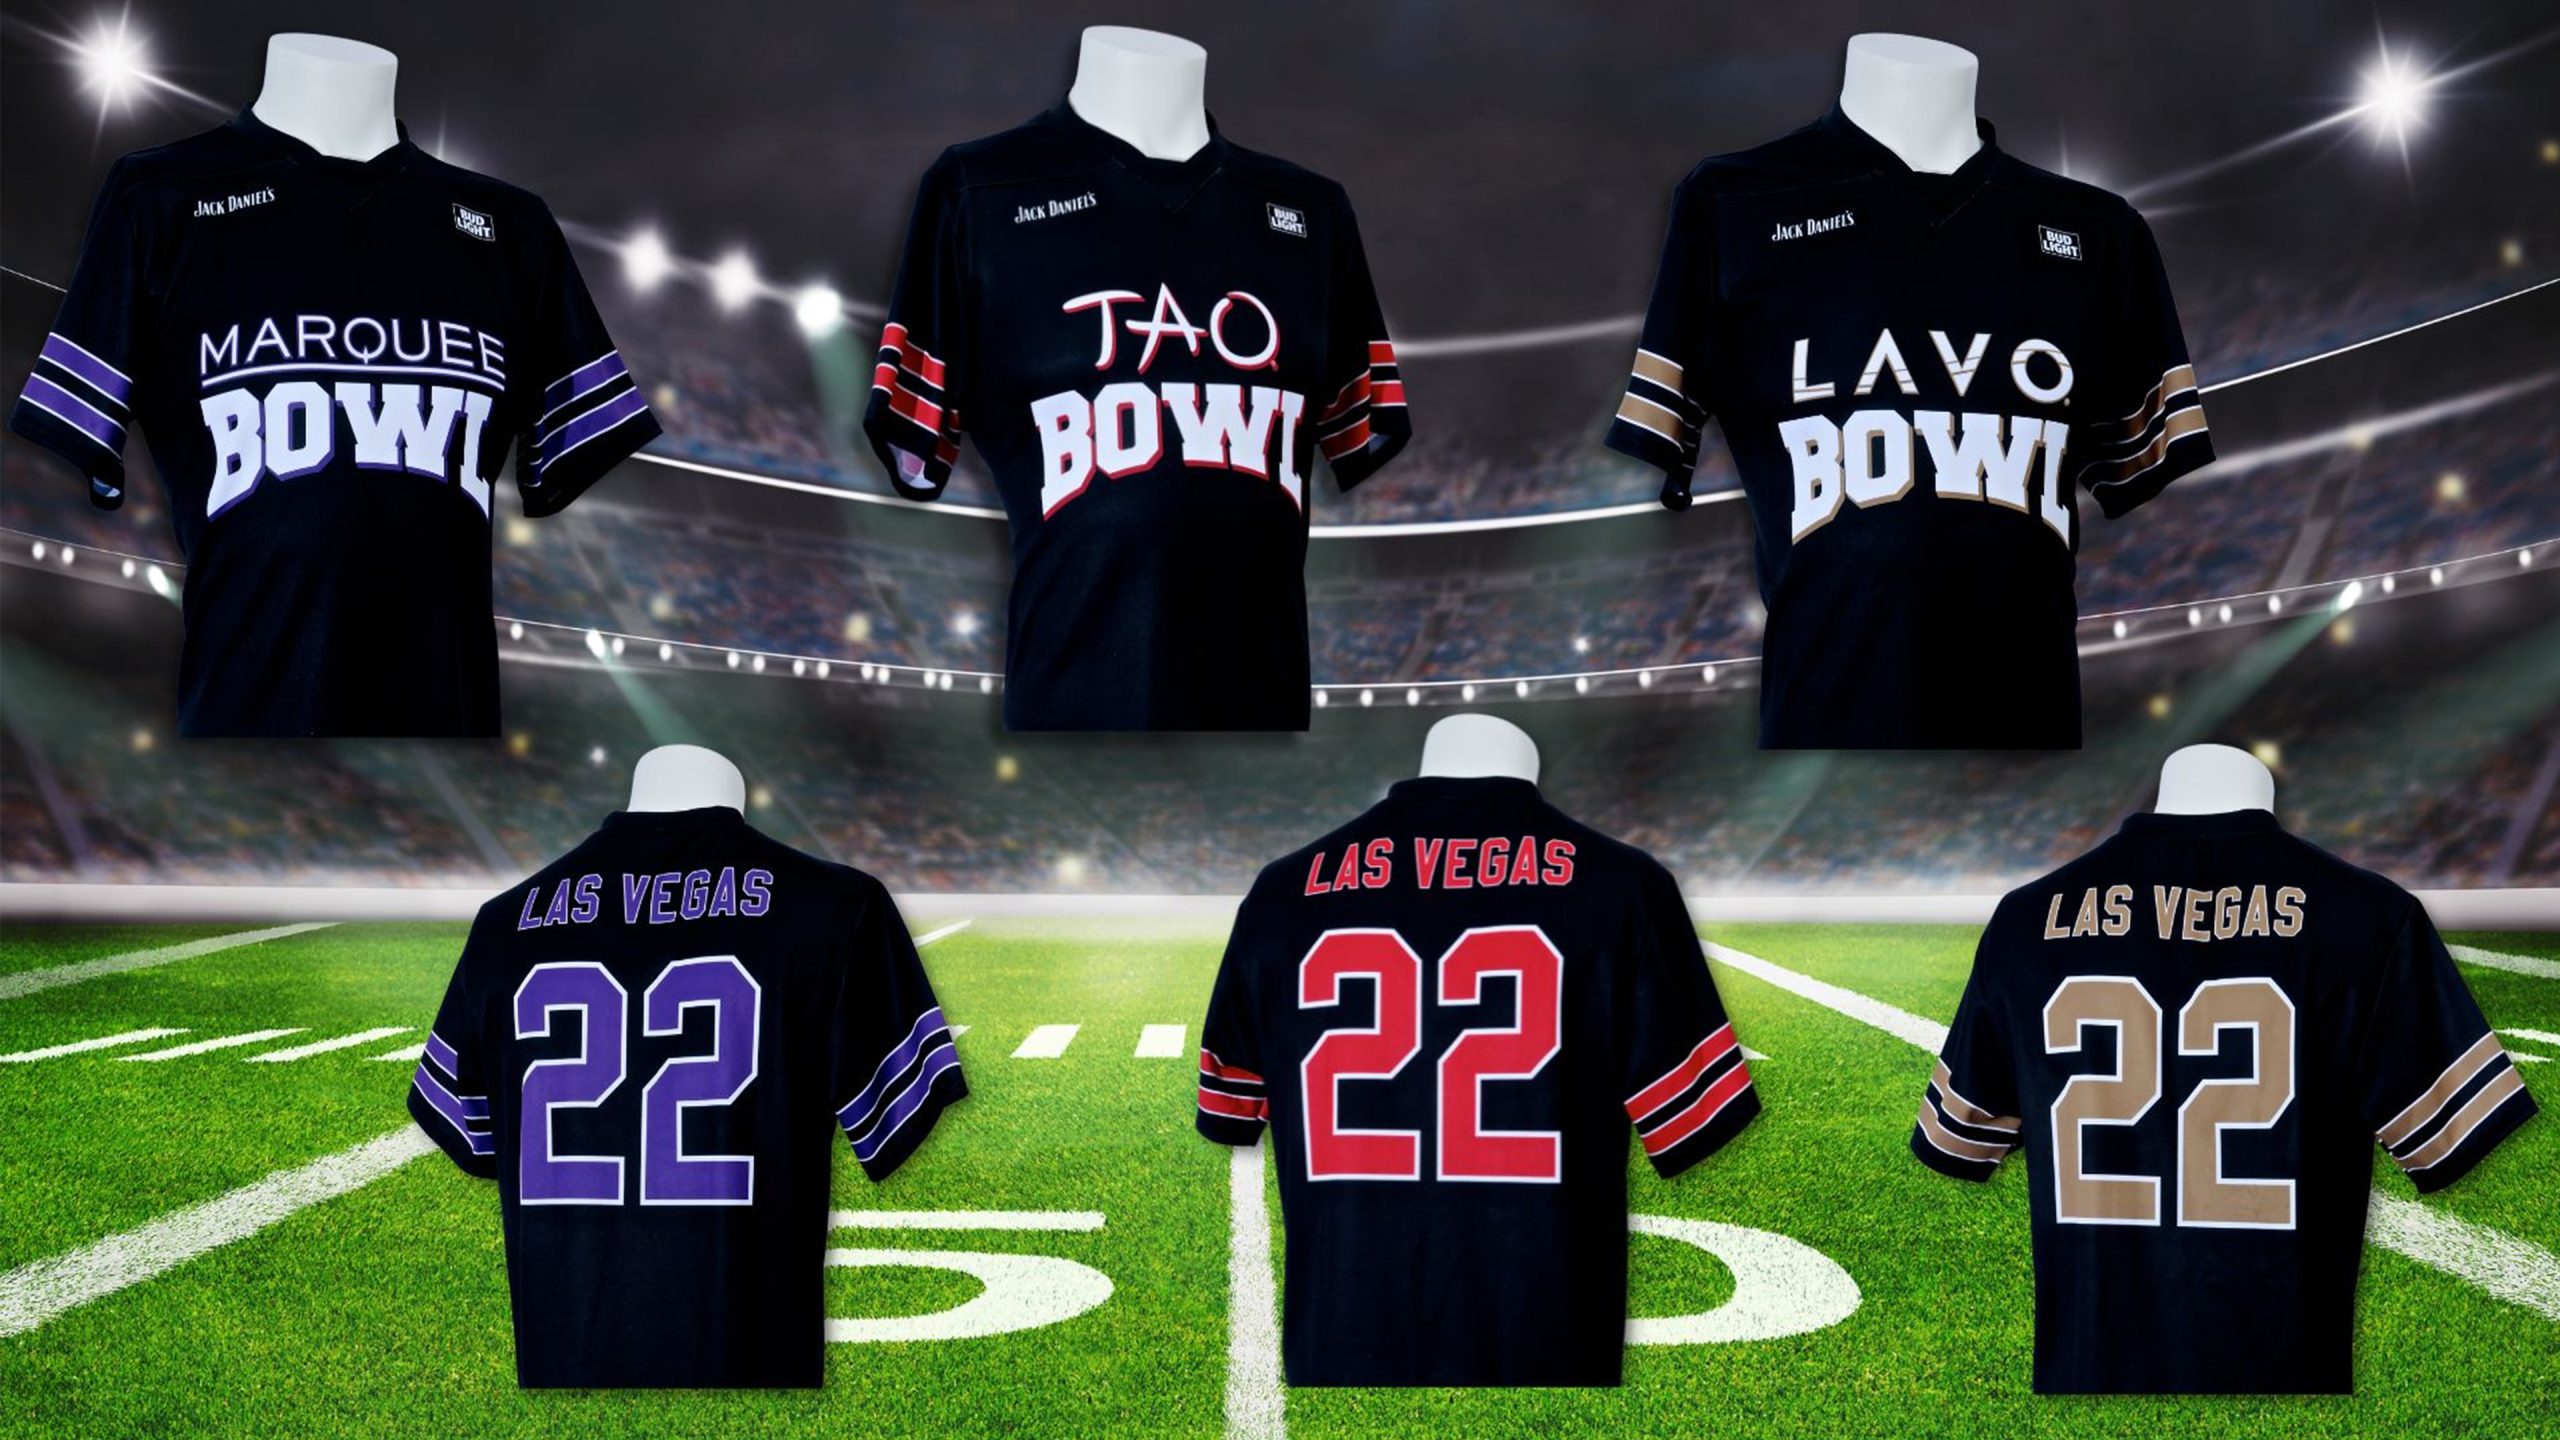 Our client The TAO Group asked us to create custom football jerseys for their service staff for Super Bowl Sunday for their venues at Marquee, TAO and LAVO. Each jersey featured the logos of their sponsors Jack Daniels and Bud Light on either shoulder. The venue names were prominently shown on the fronts of each jersey and the number 22 on the back for the year 2022.